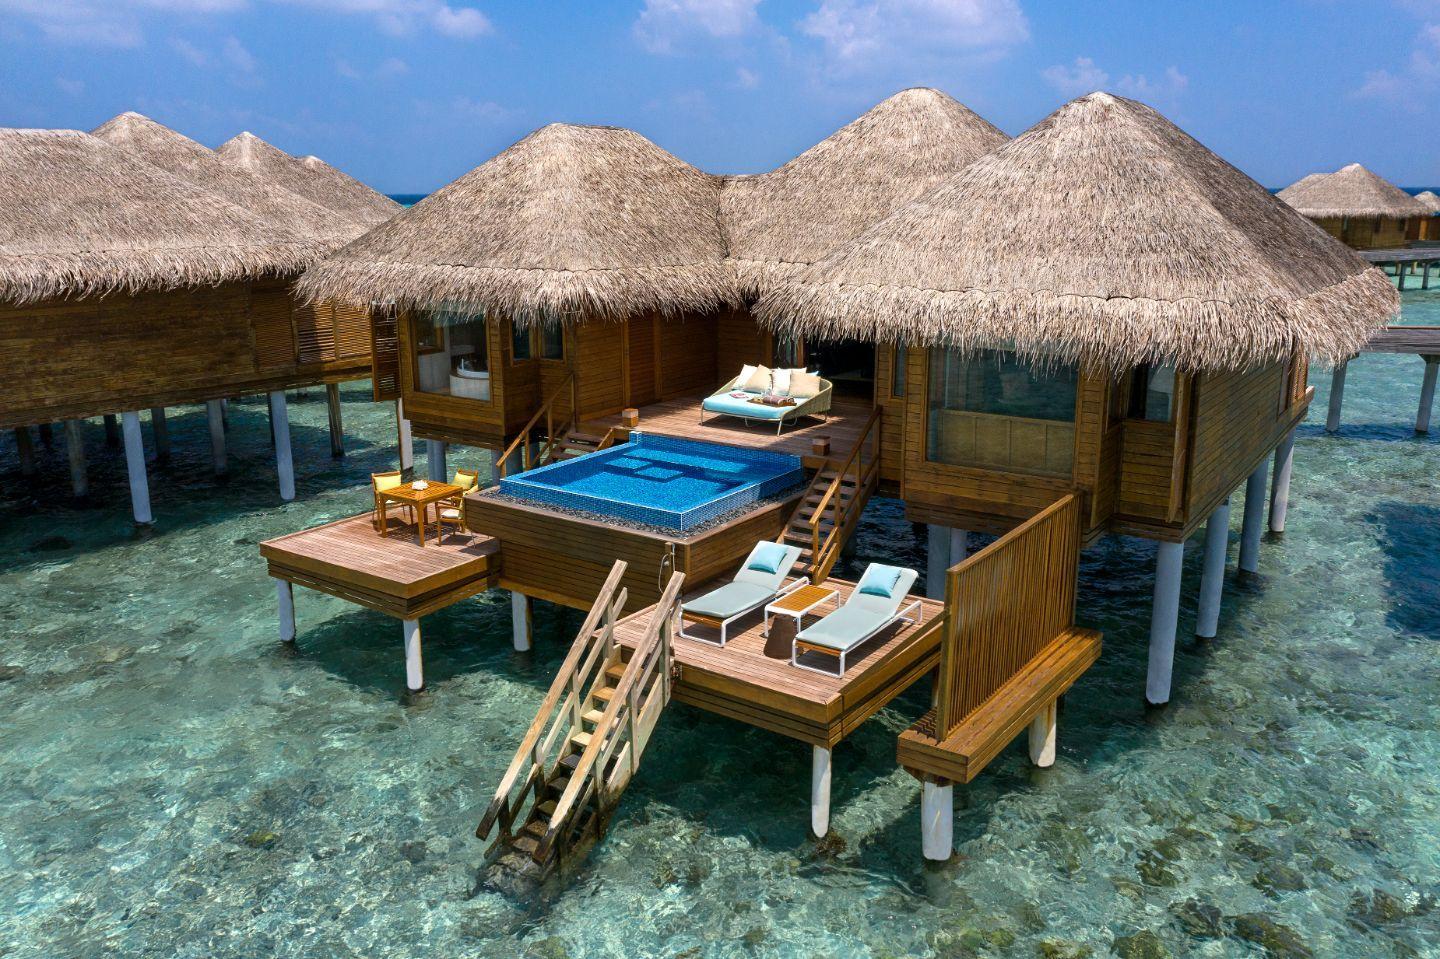 Save 40% and get free Halfboard in an Overwater Villa at 5 Star hotel Huvafenfushi